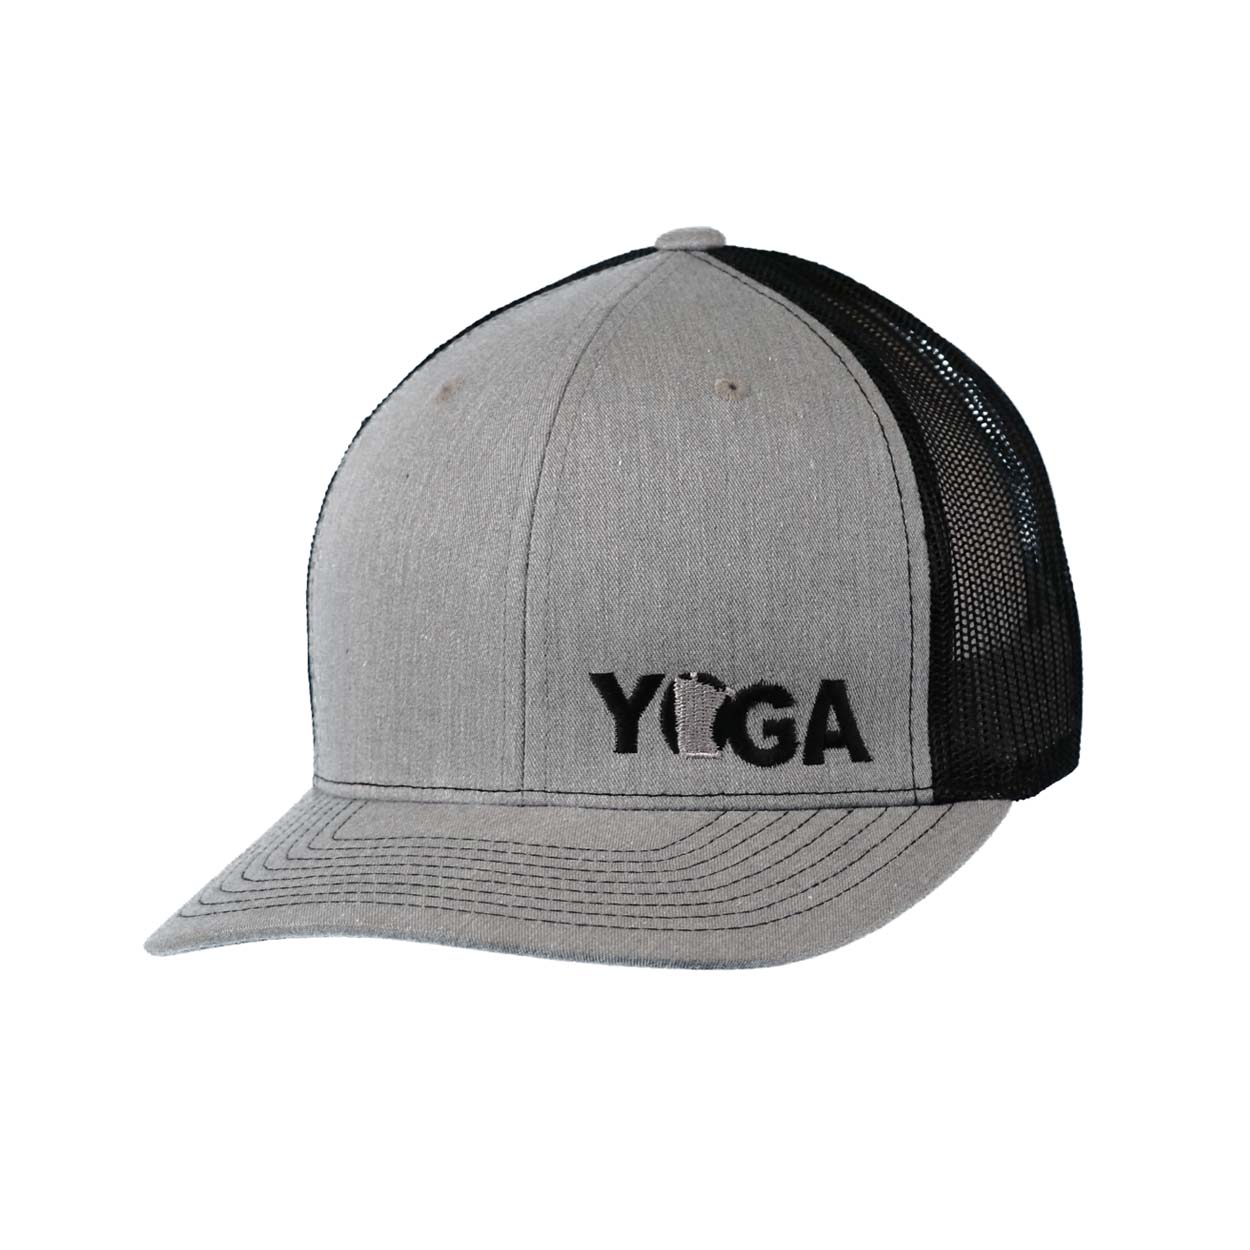 Yoga Minnesota Classic Pro Night Out Embroidered Snapback Trucker Hat Heather Gray/Black